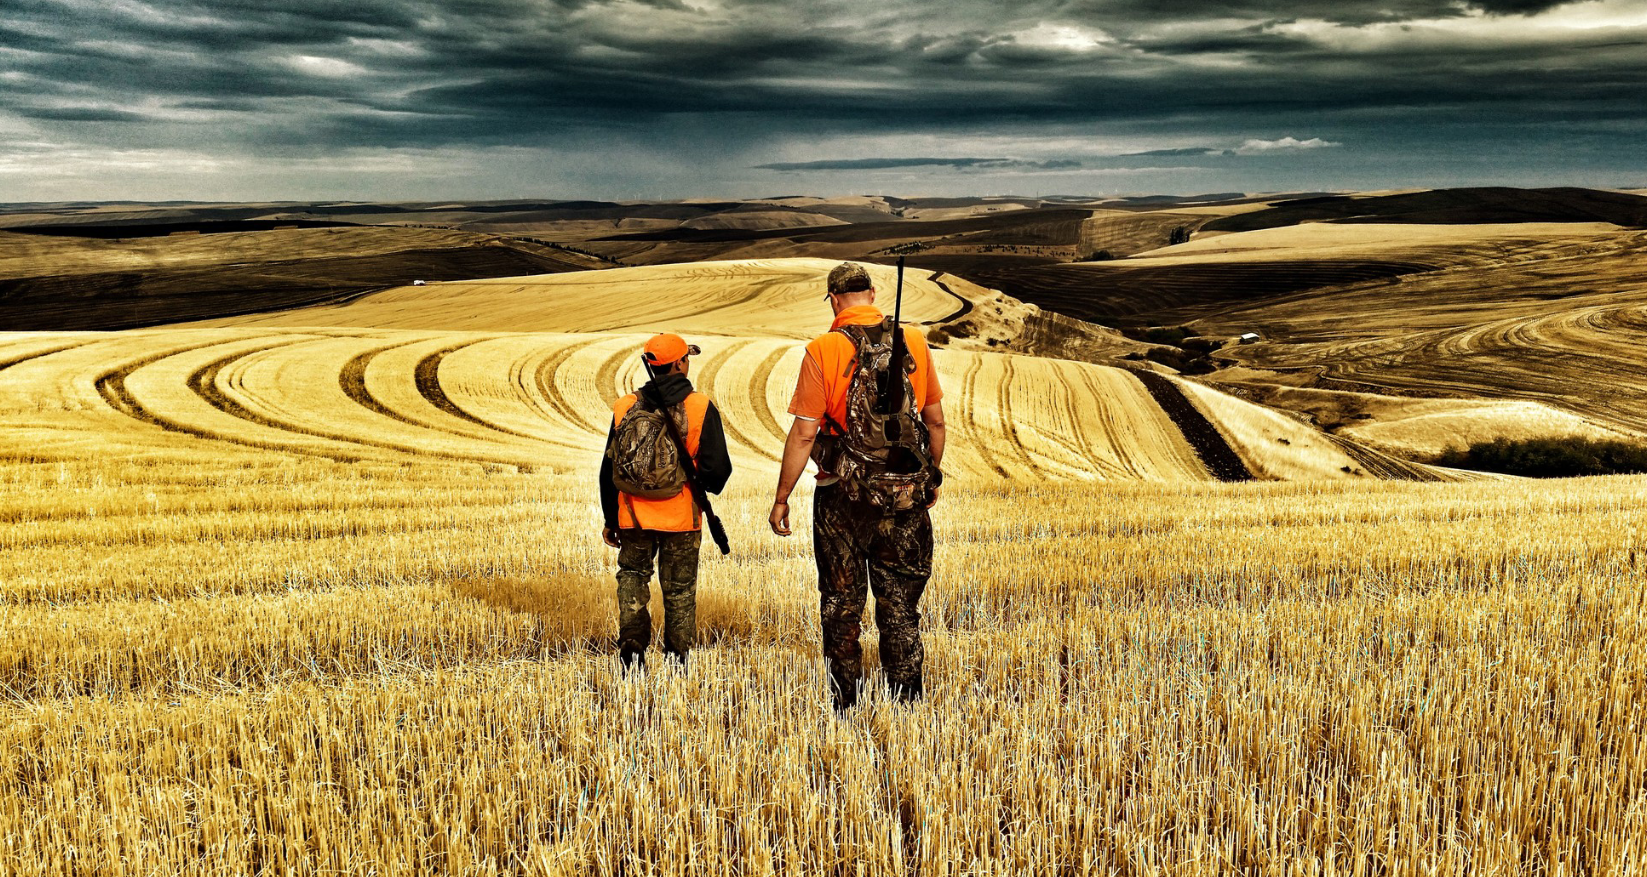 Washington Department of Fish and Wildlife opens up public comments on proposed hunting rule changes